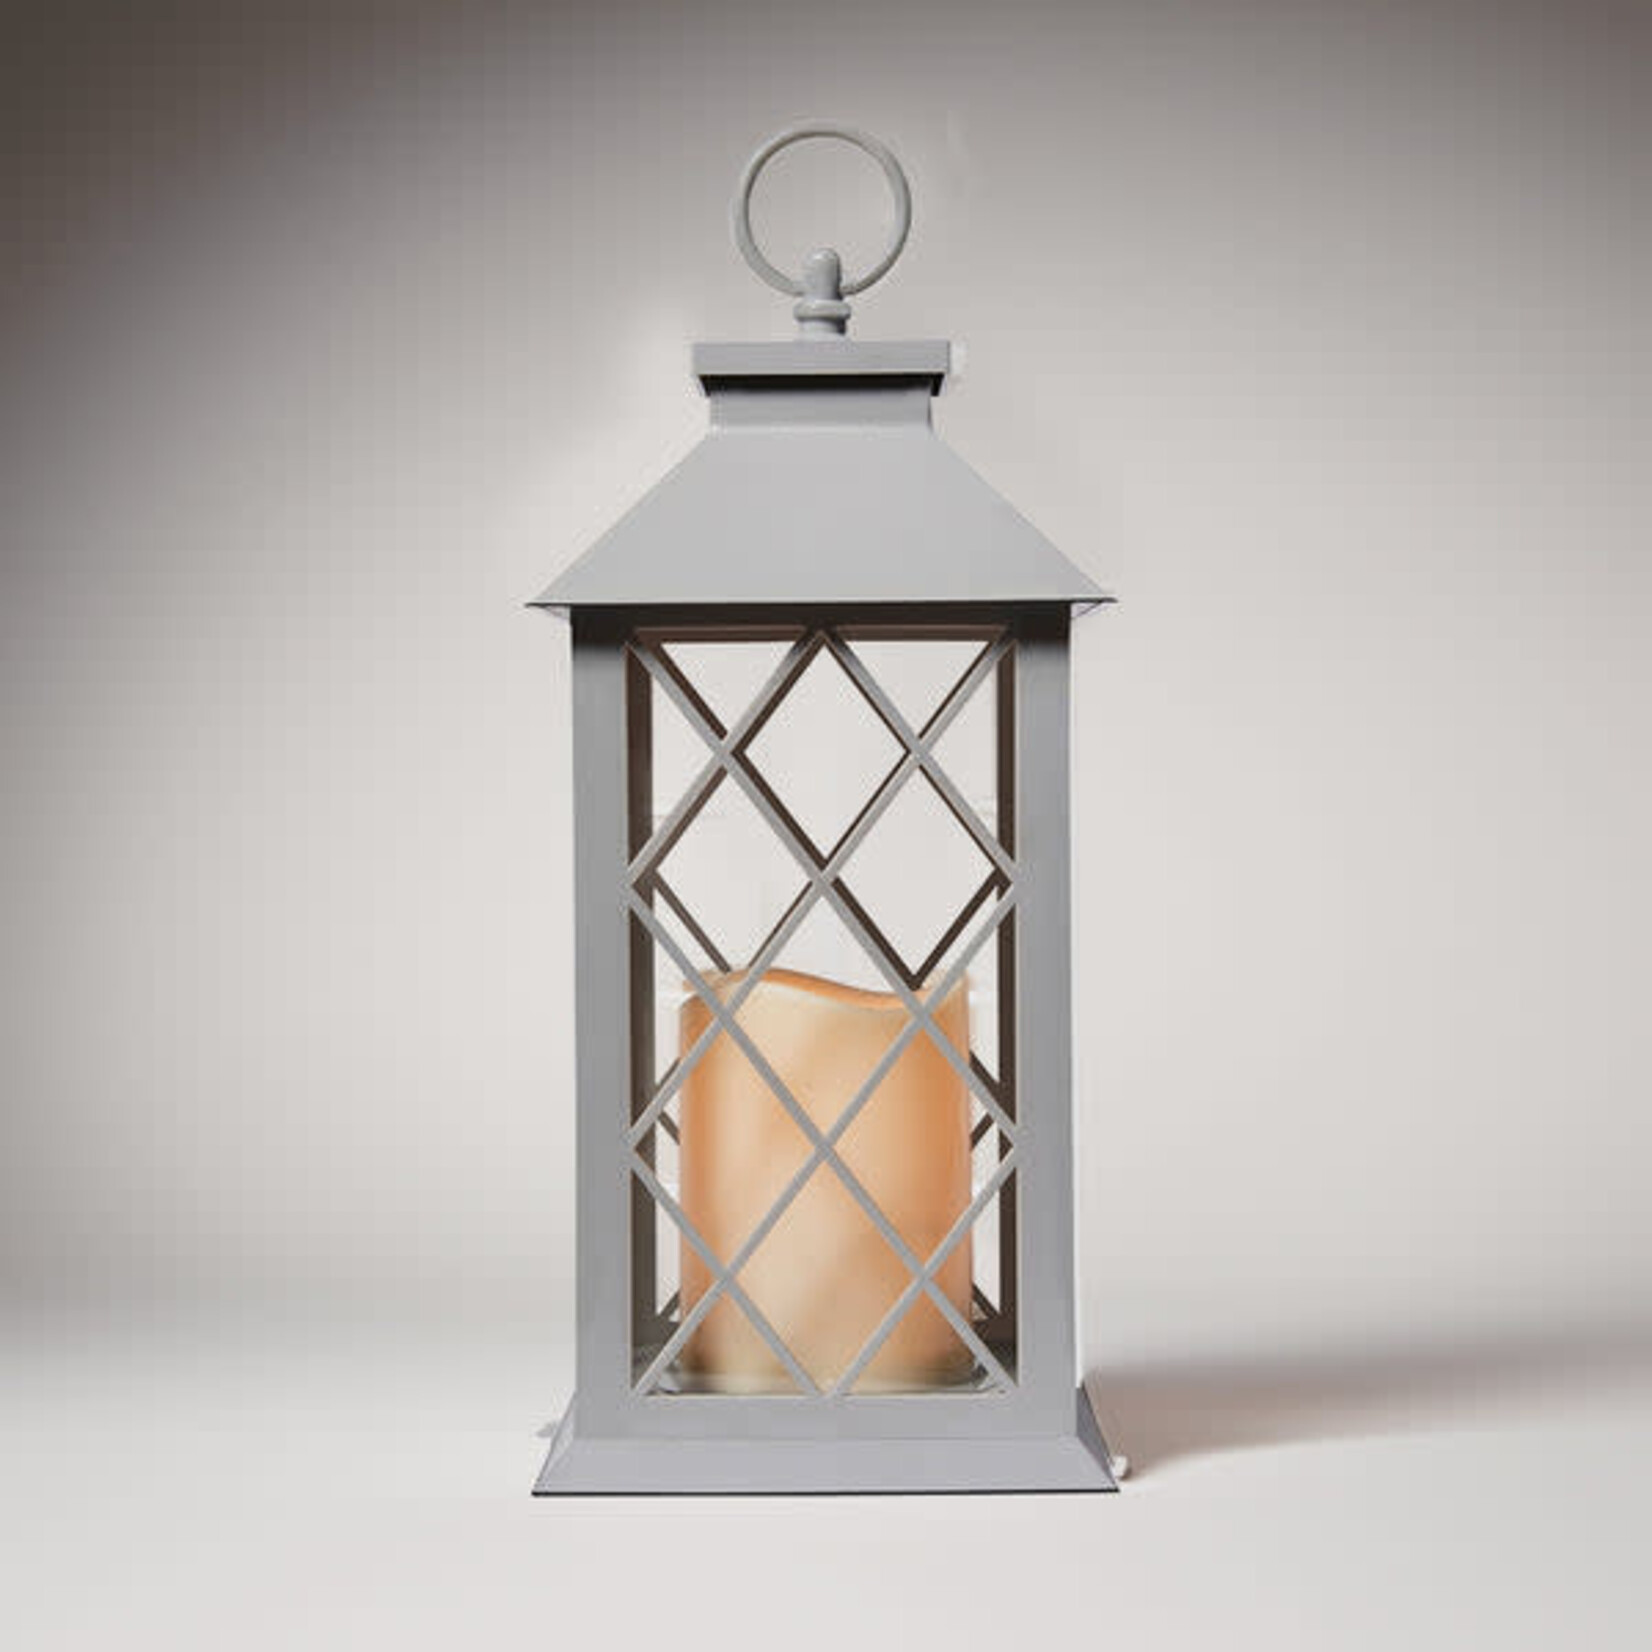 A Cheerful Giver Grey Flameless Lantern